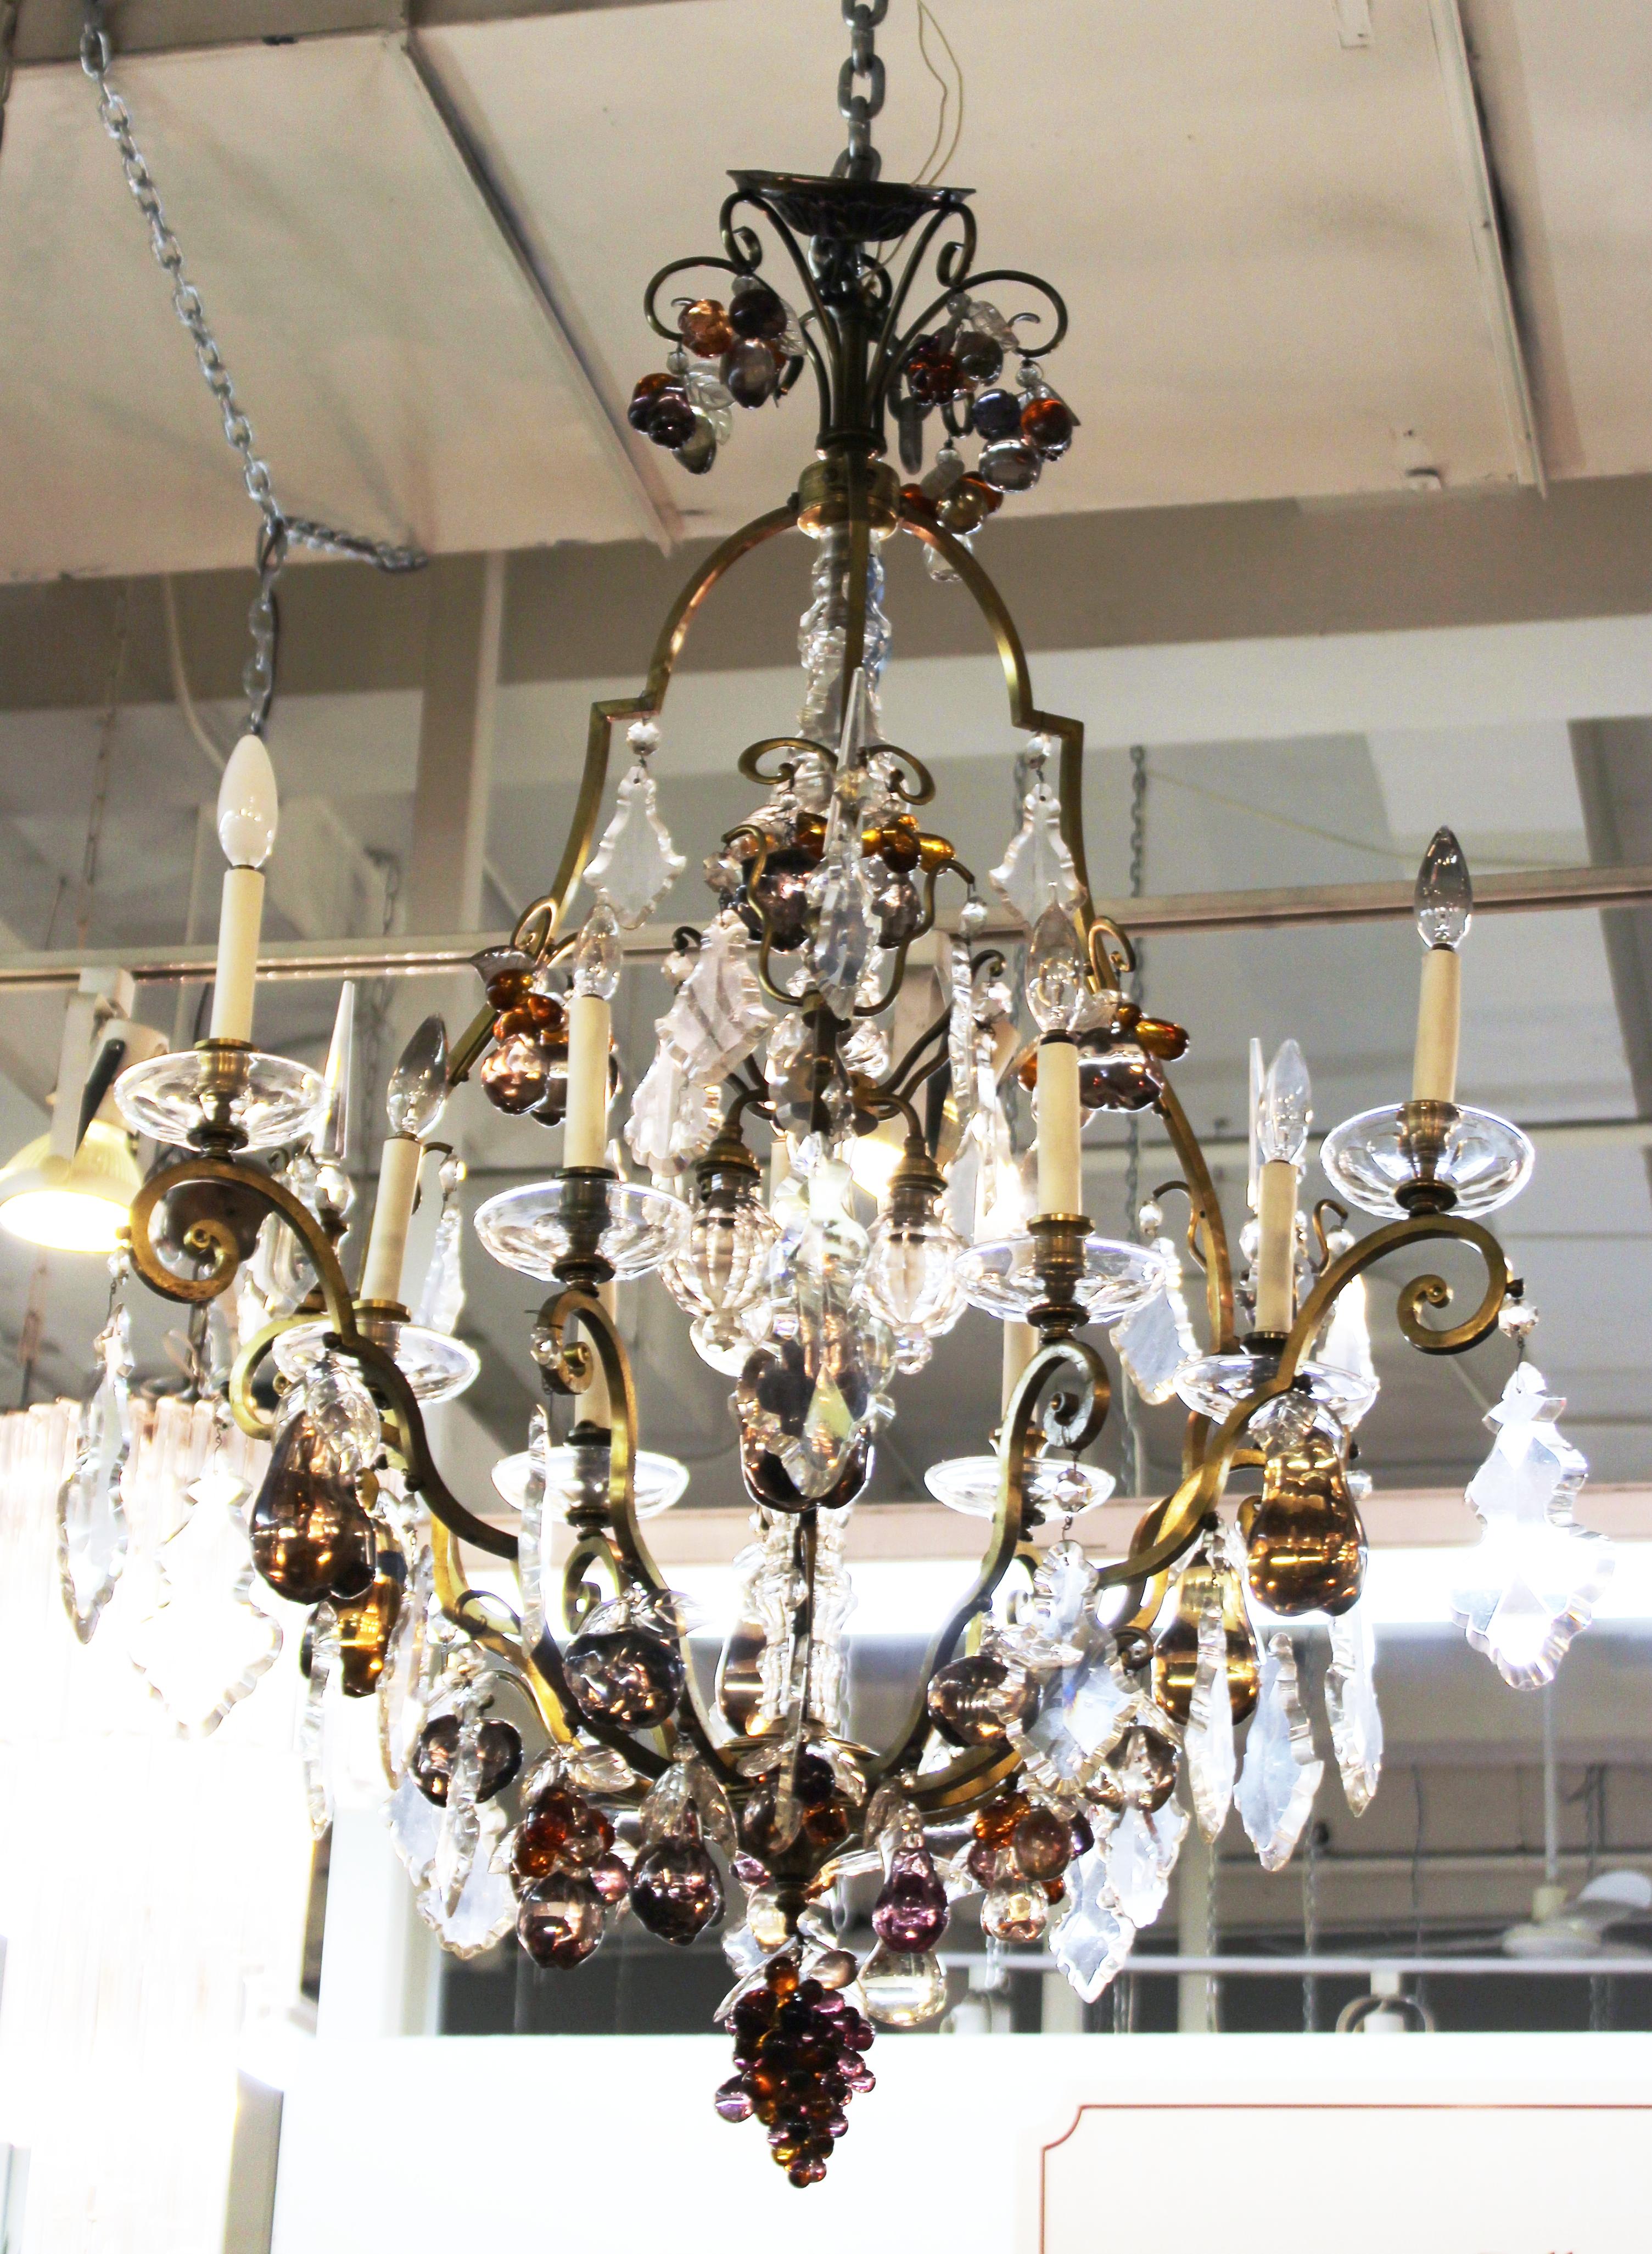 American Hollywood Regency monumental chandelier with crystal elements and multicolored crystal fruit elements on an elaborate brass frame. The piece is in good vintage condition and was made in the mid-20th century.